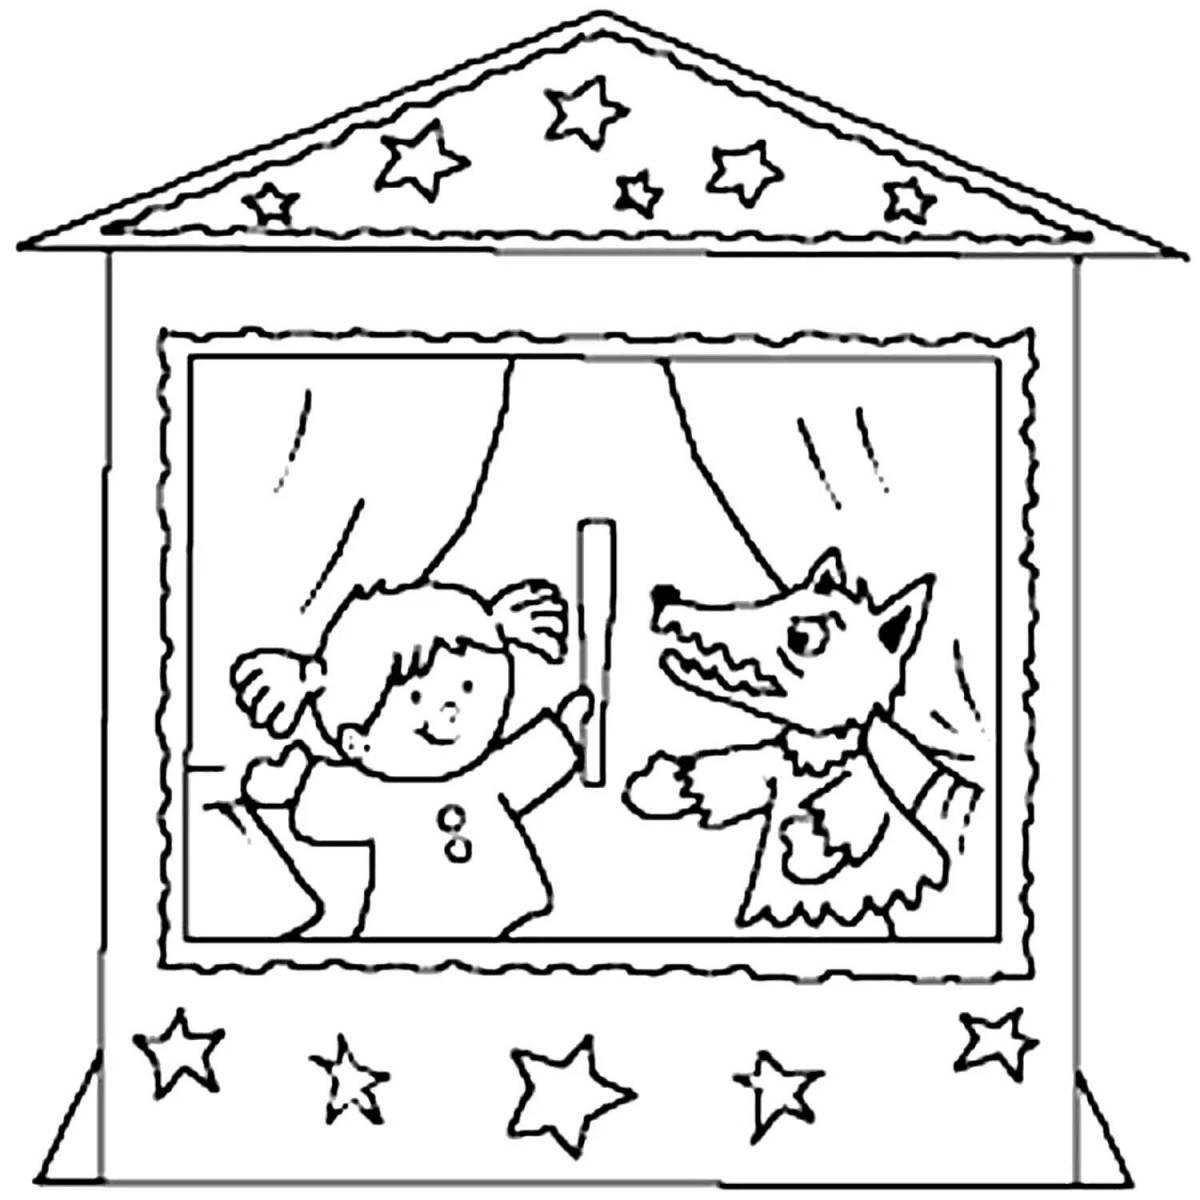 Puppet theater #2